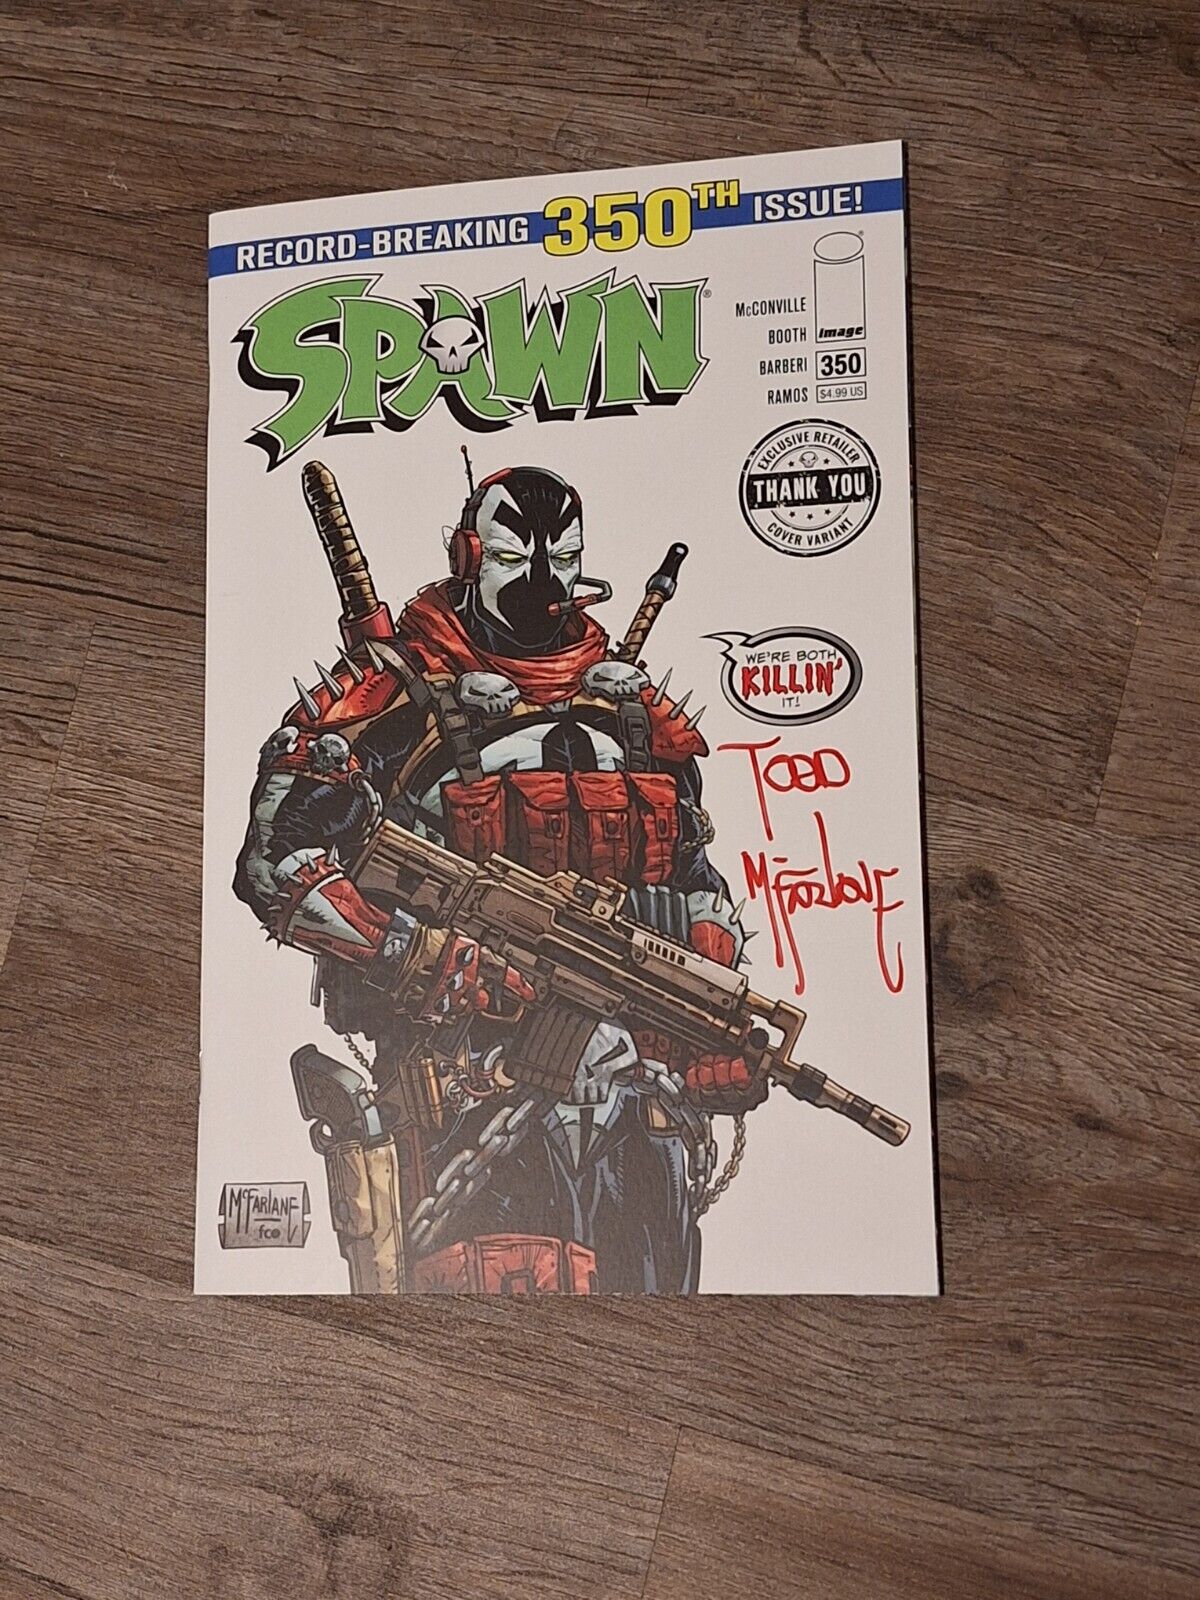 SPAWN #350 TODD MCFARLANE SIGNED RETAILER THANK YOU COVER VARIANT 1 PER STORE